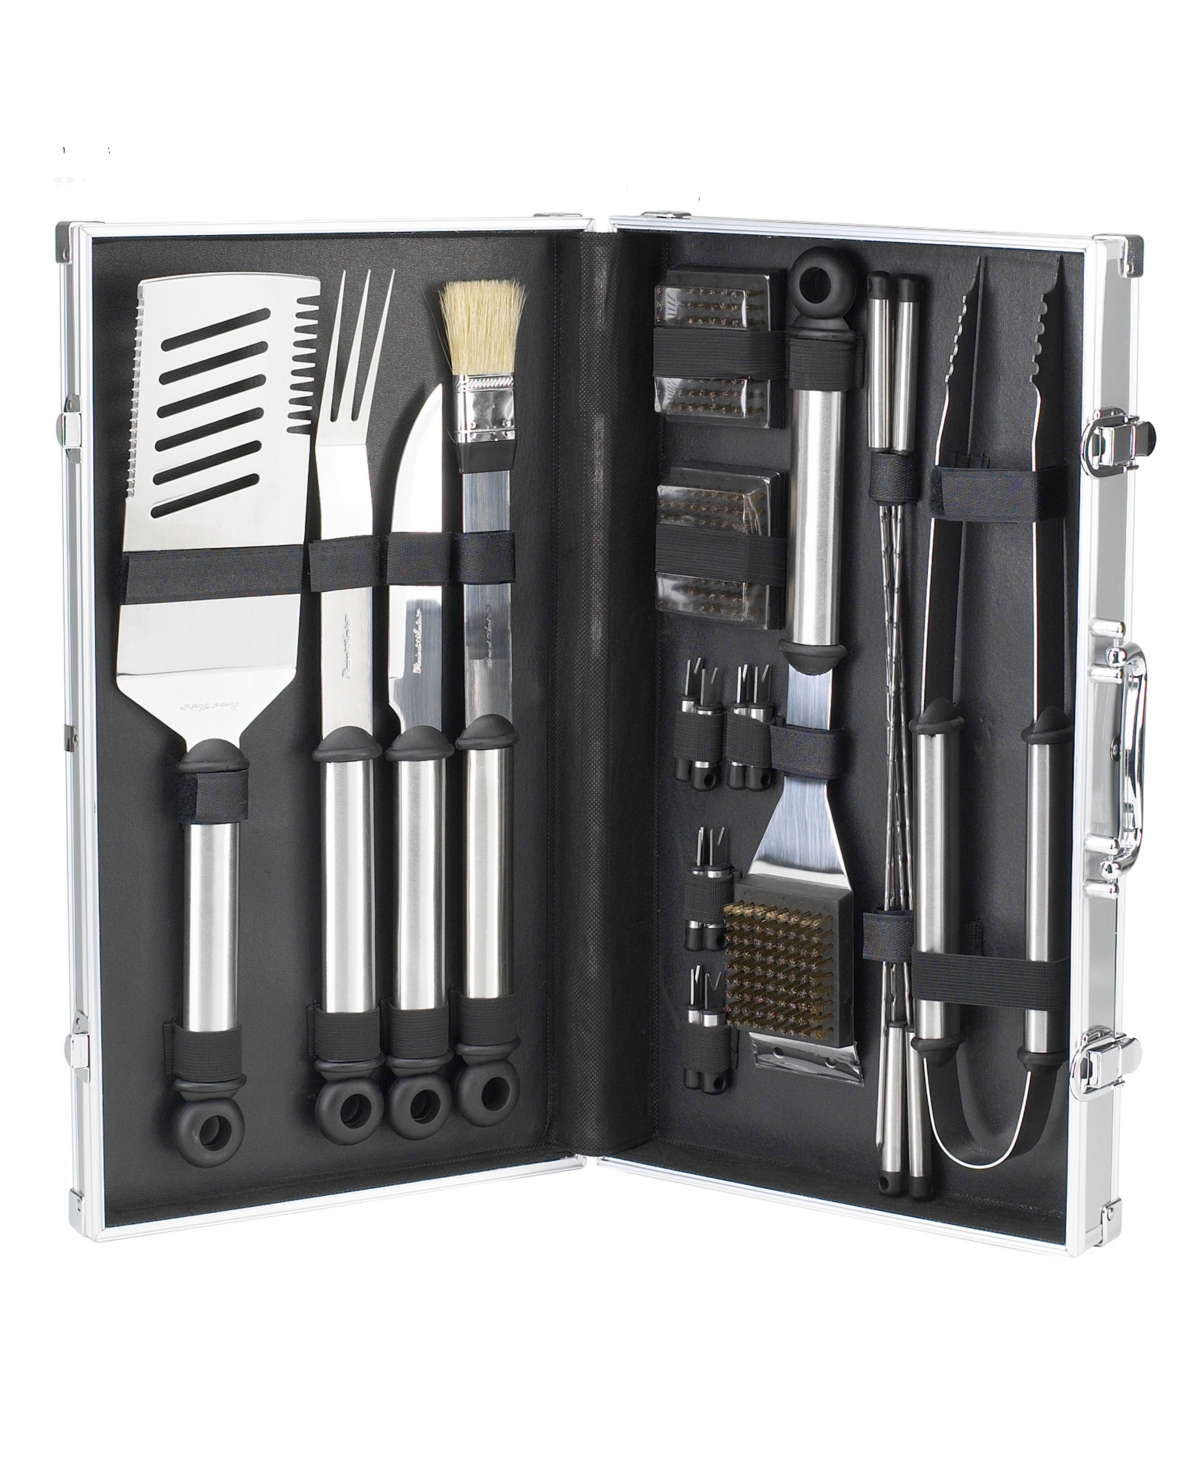 20 Piece Stainless Steel Barbecue Grill Tool Set - Aluminum Case - Chrome